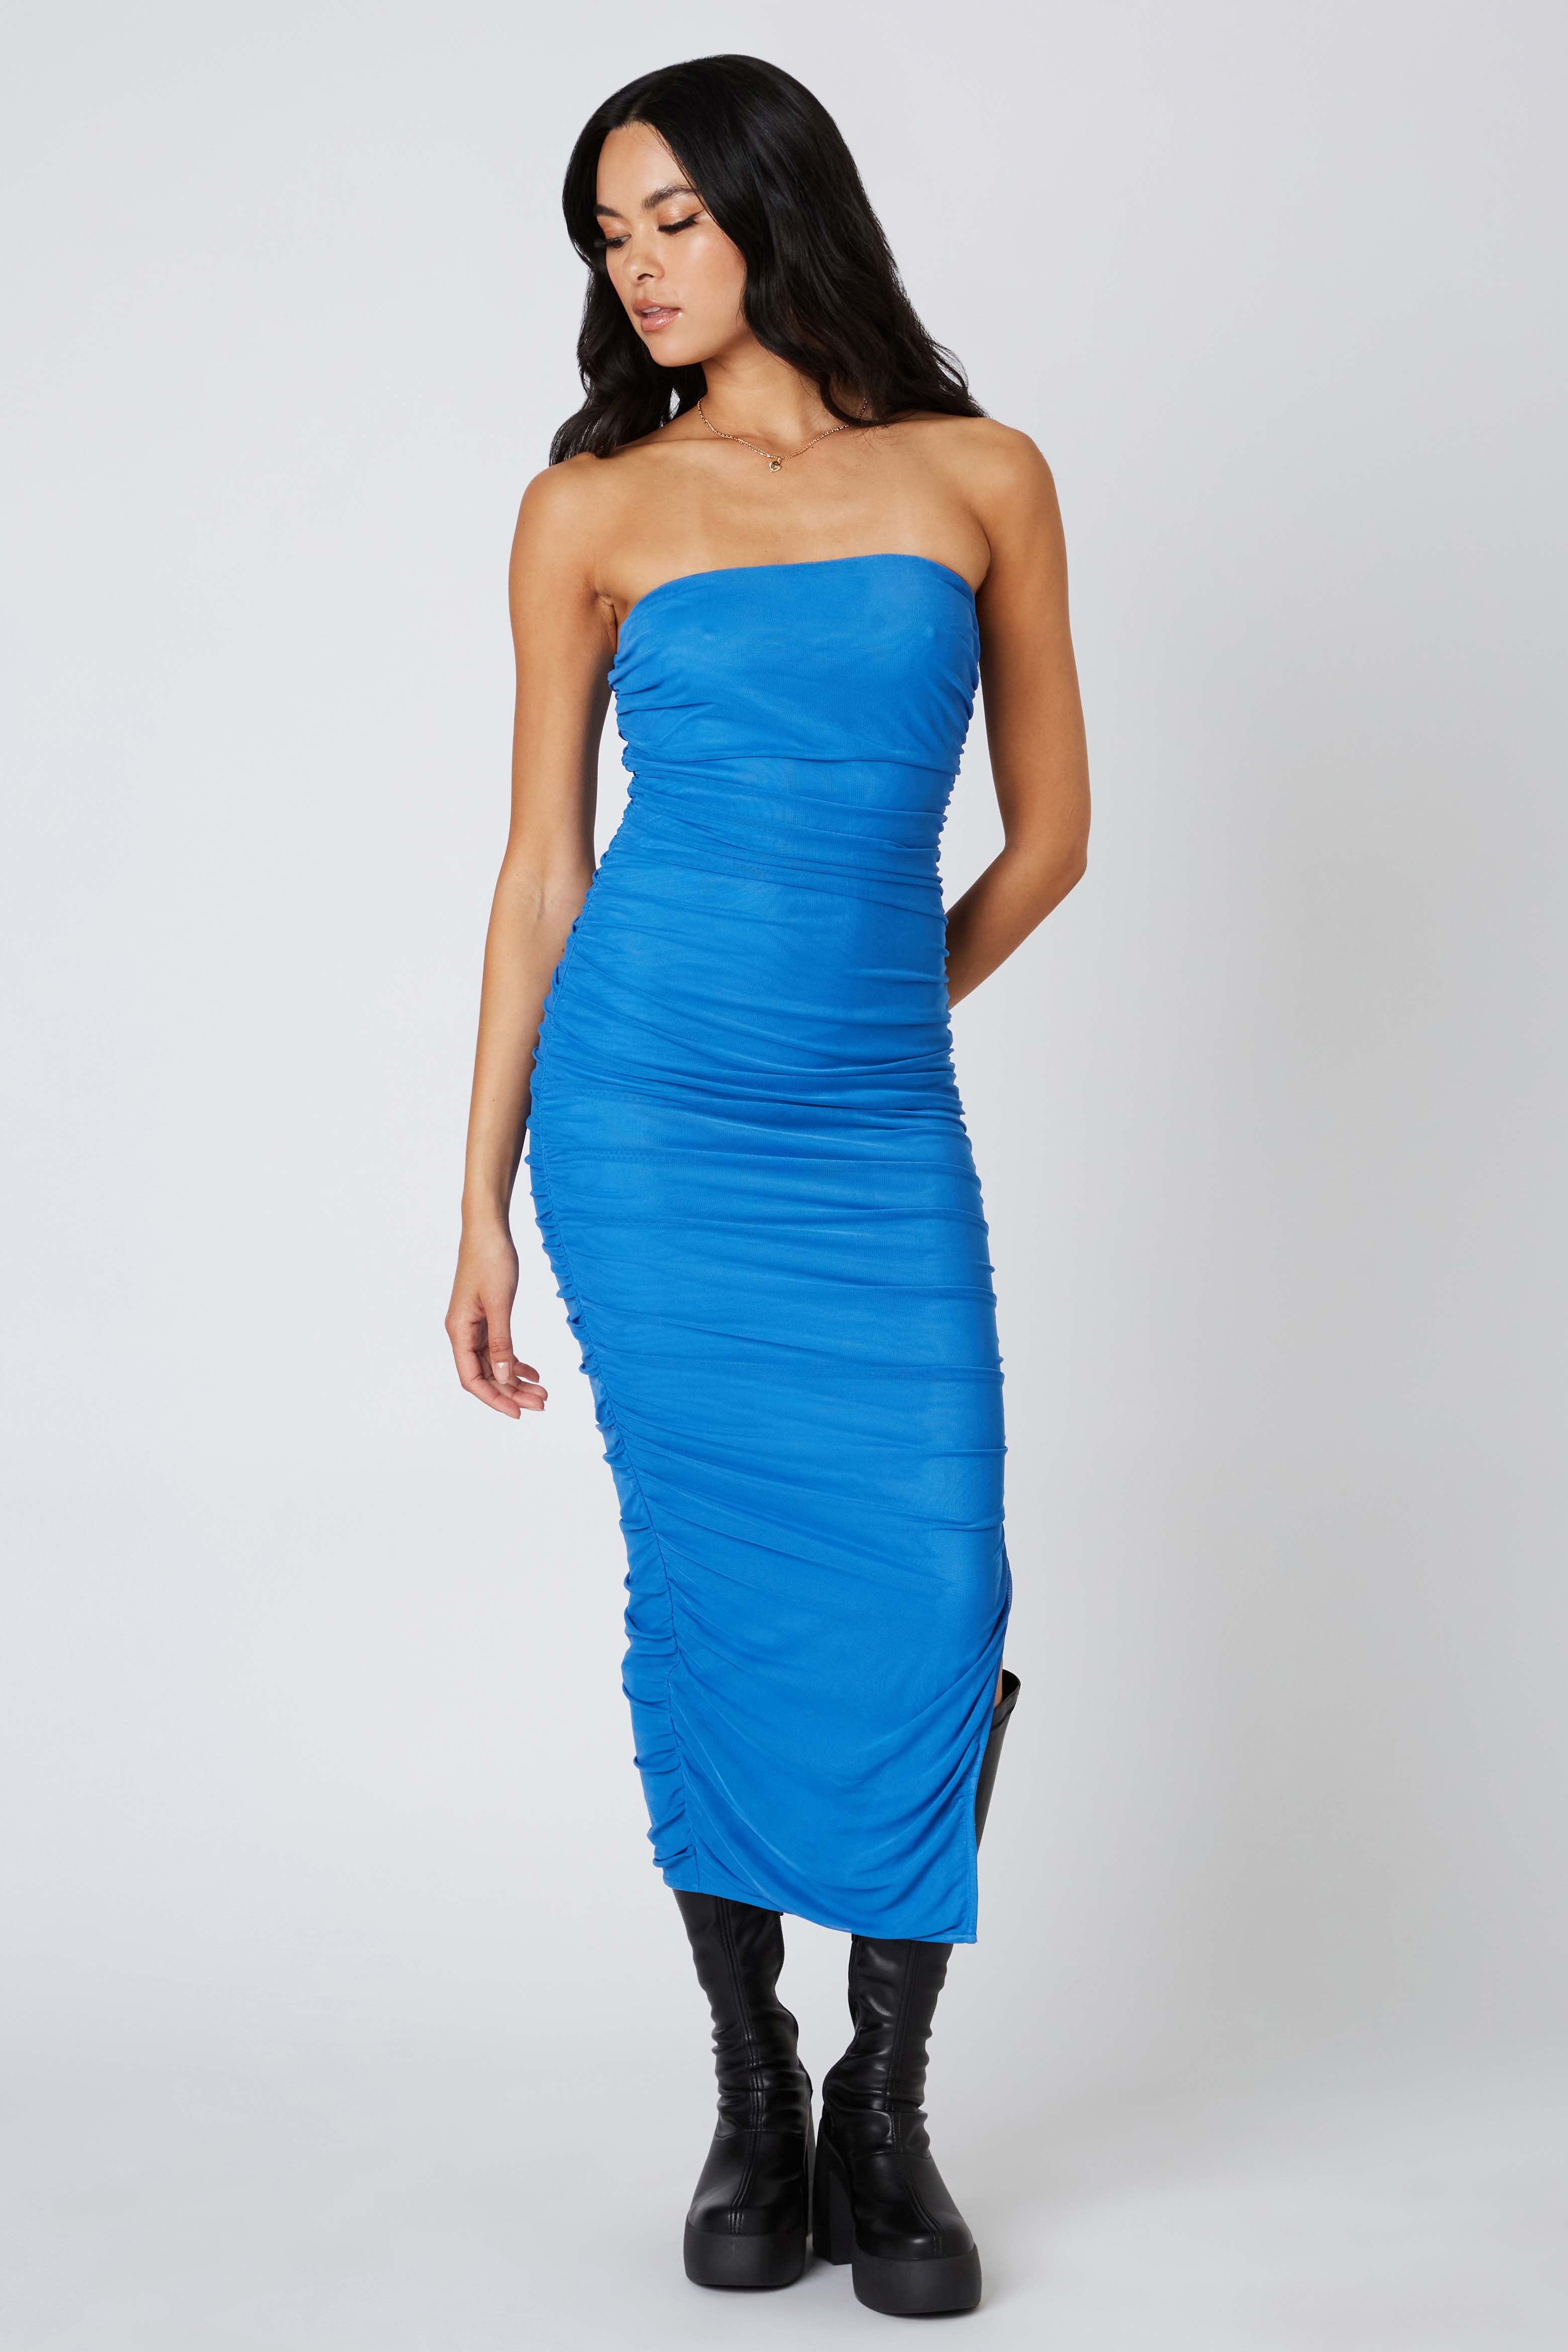 Ruched Bodycon Midi Dress in Marine Blue Front View